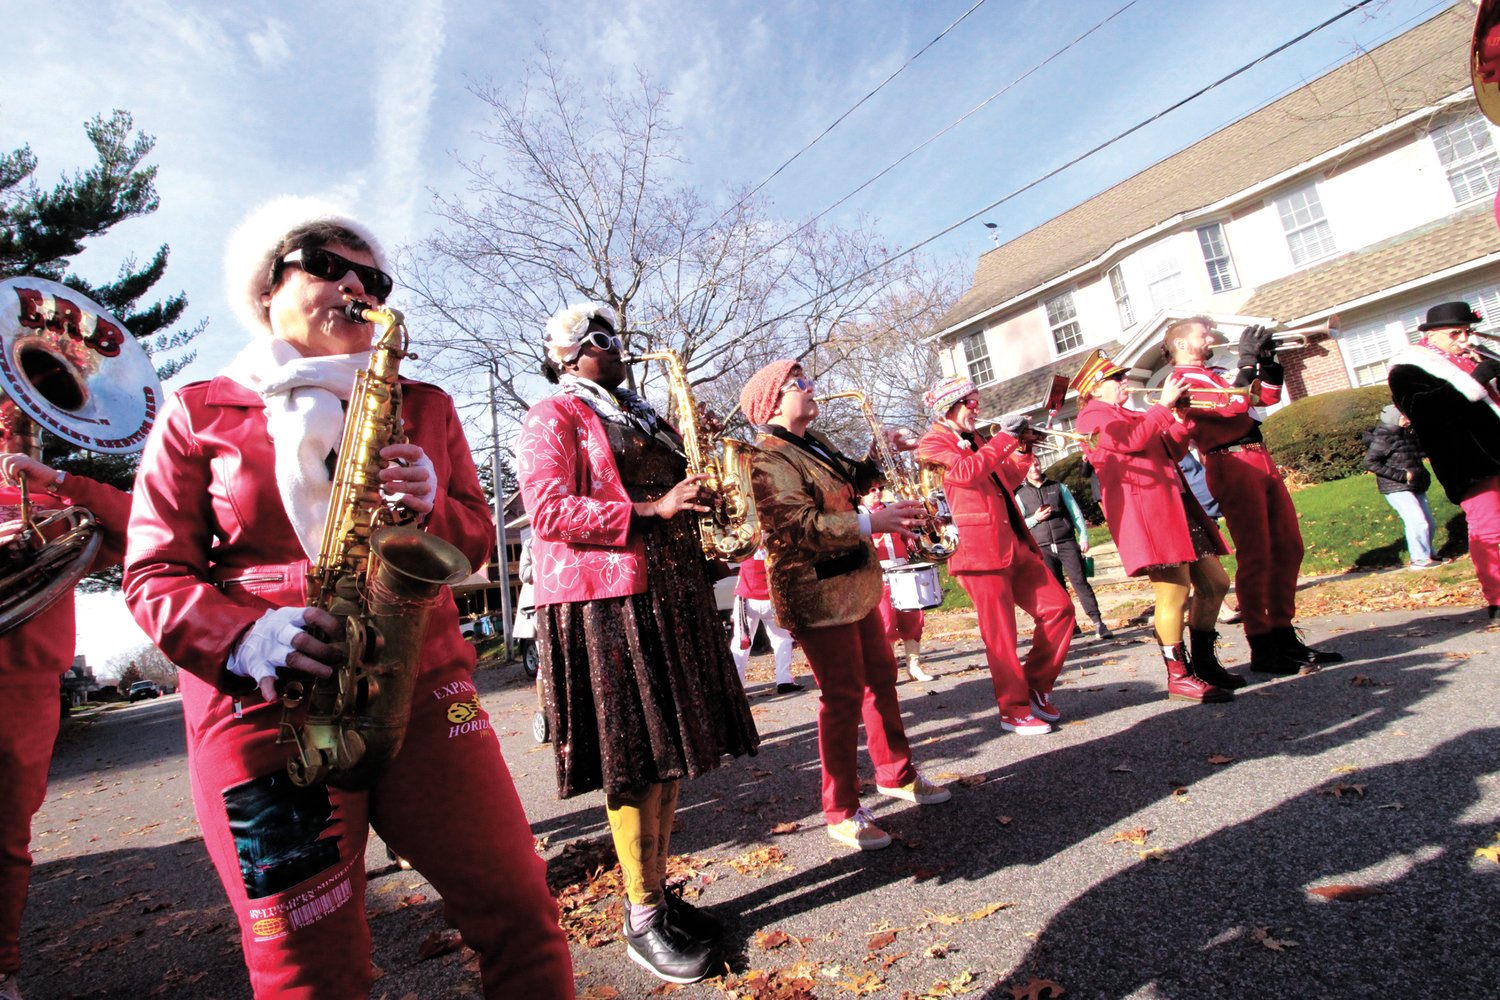 SETTING THE MOOD: The Extraordinary Rendition Band provided musical entertainment at Sunday’s sculpture and marker unveiling. (Herald photo)